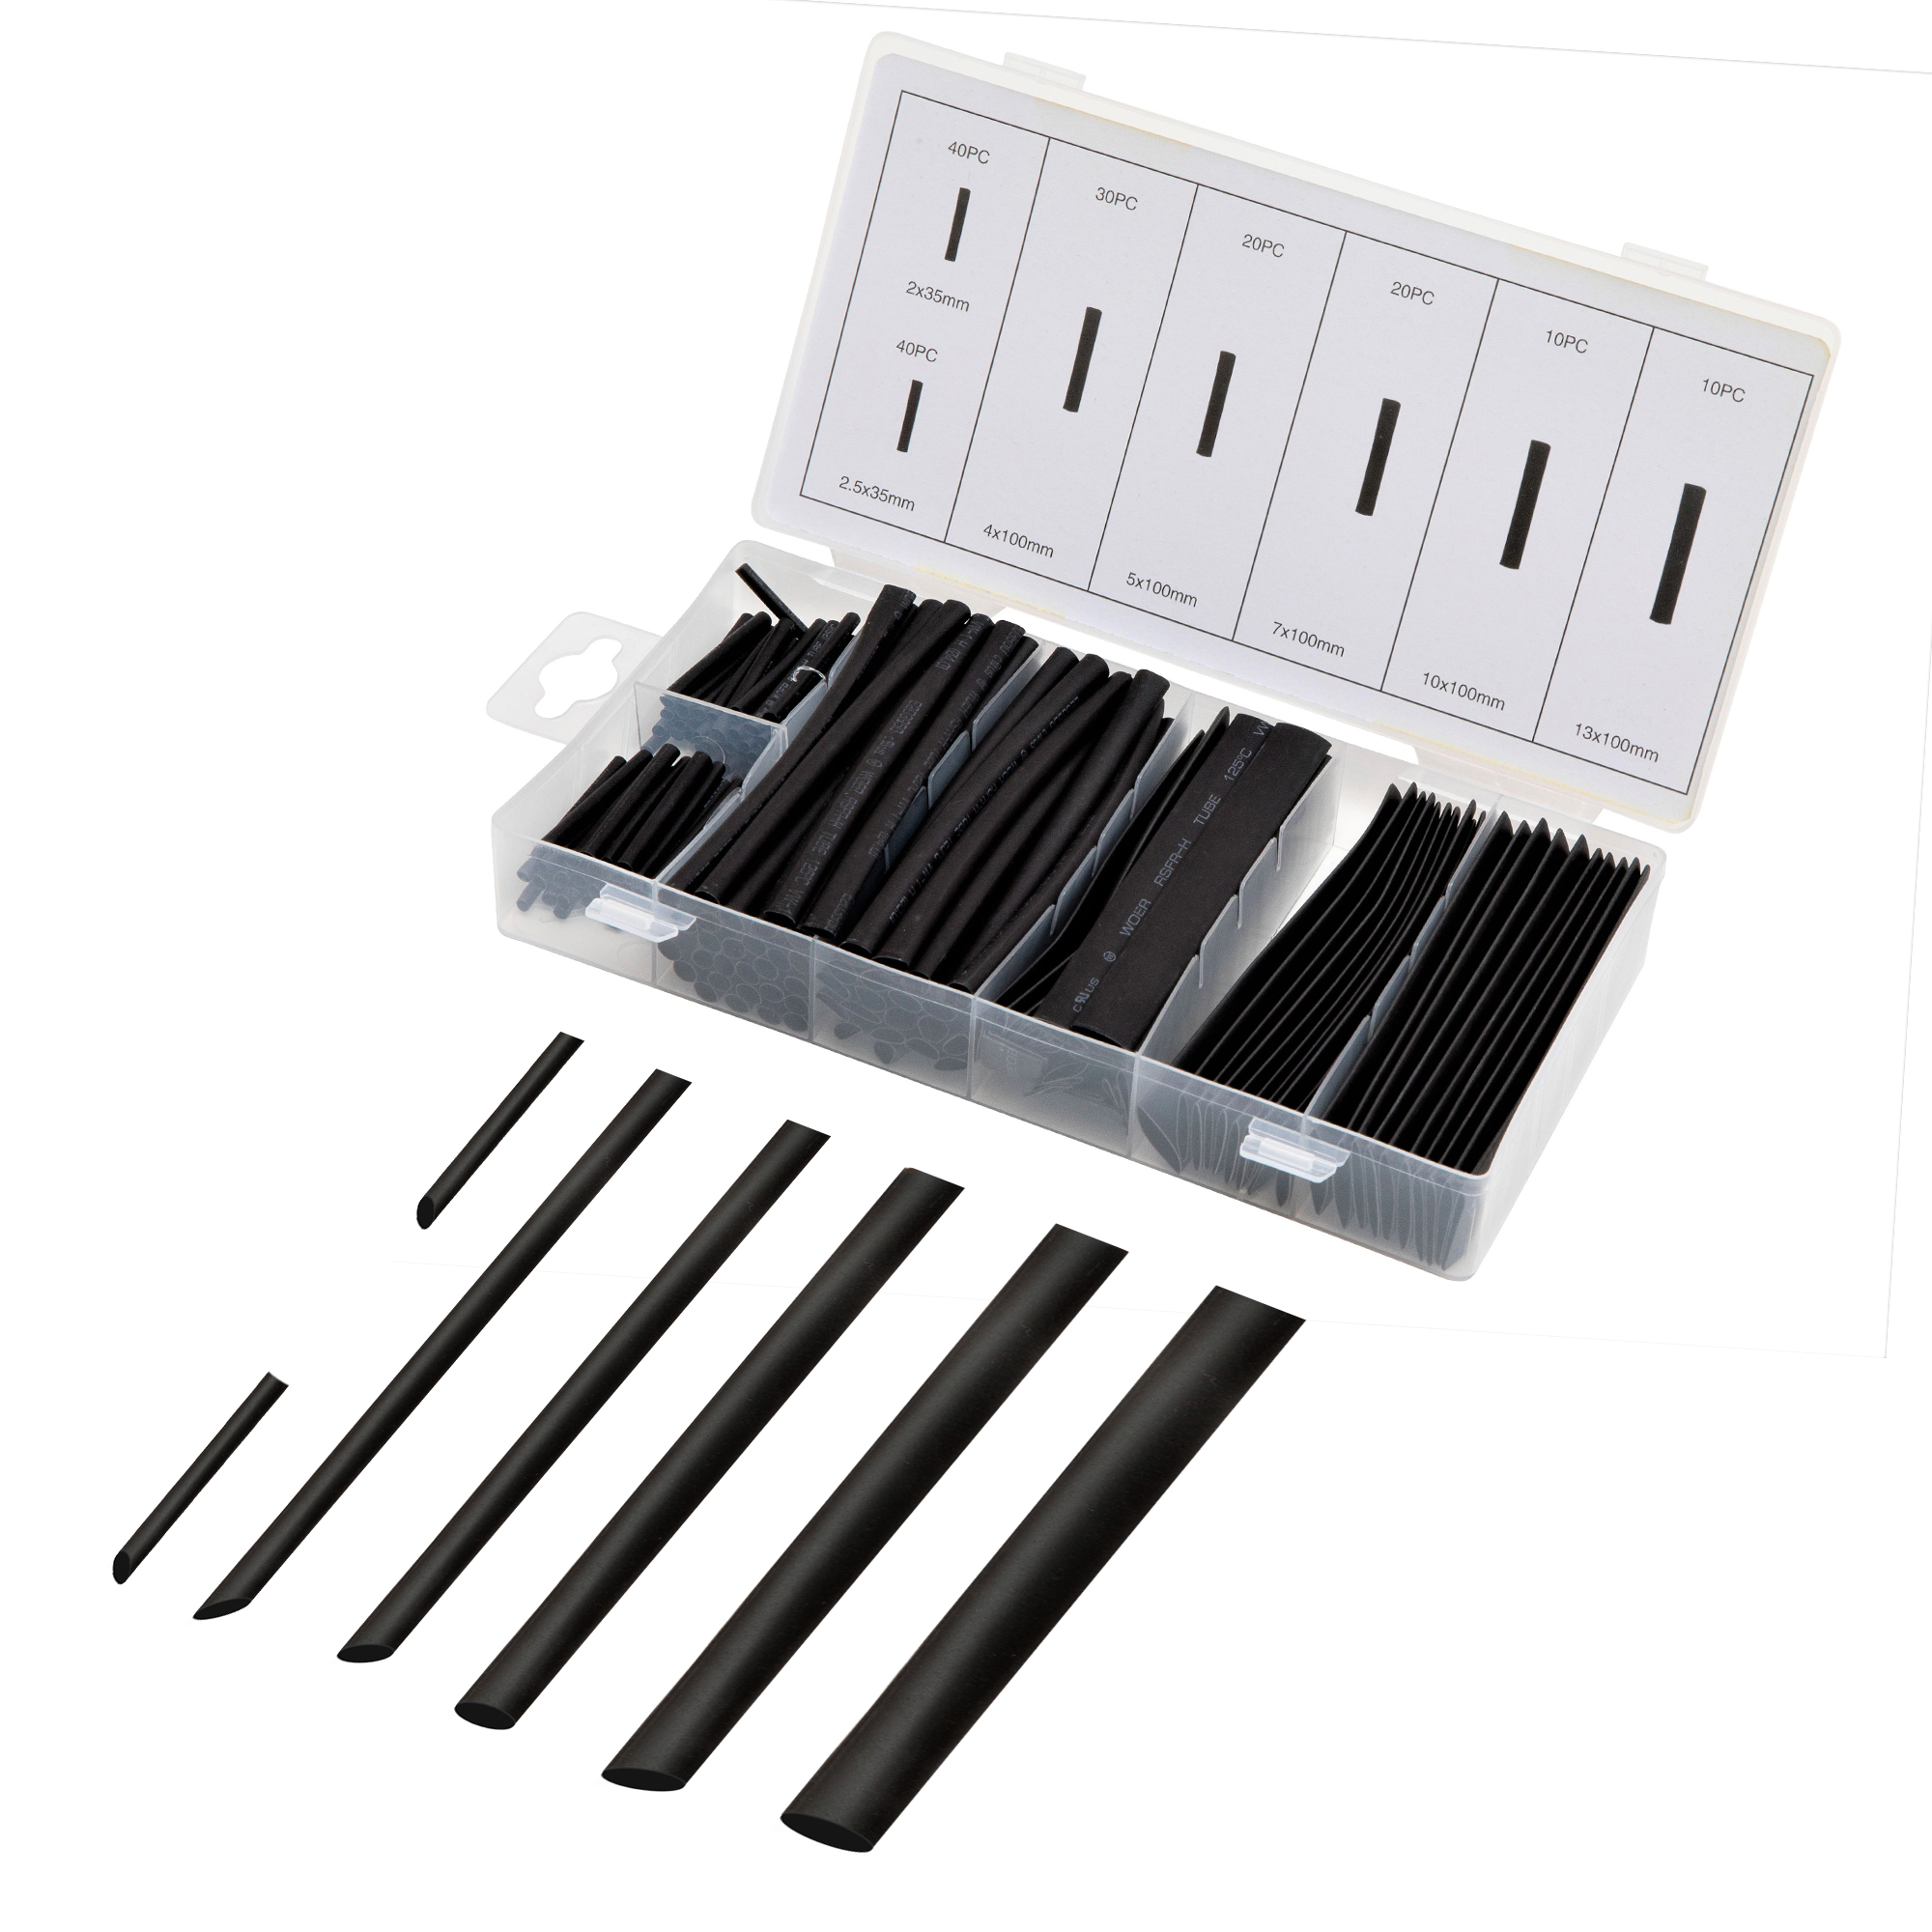 170 Pieces - Black Heat Shrink TUBING Multi-Pack Assortment for Insulating, Covering and Joining Open Wire Connections.